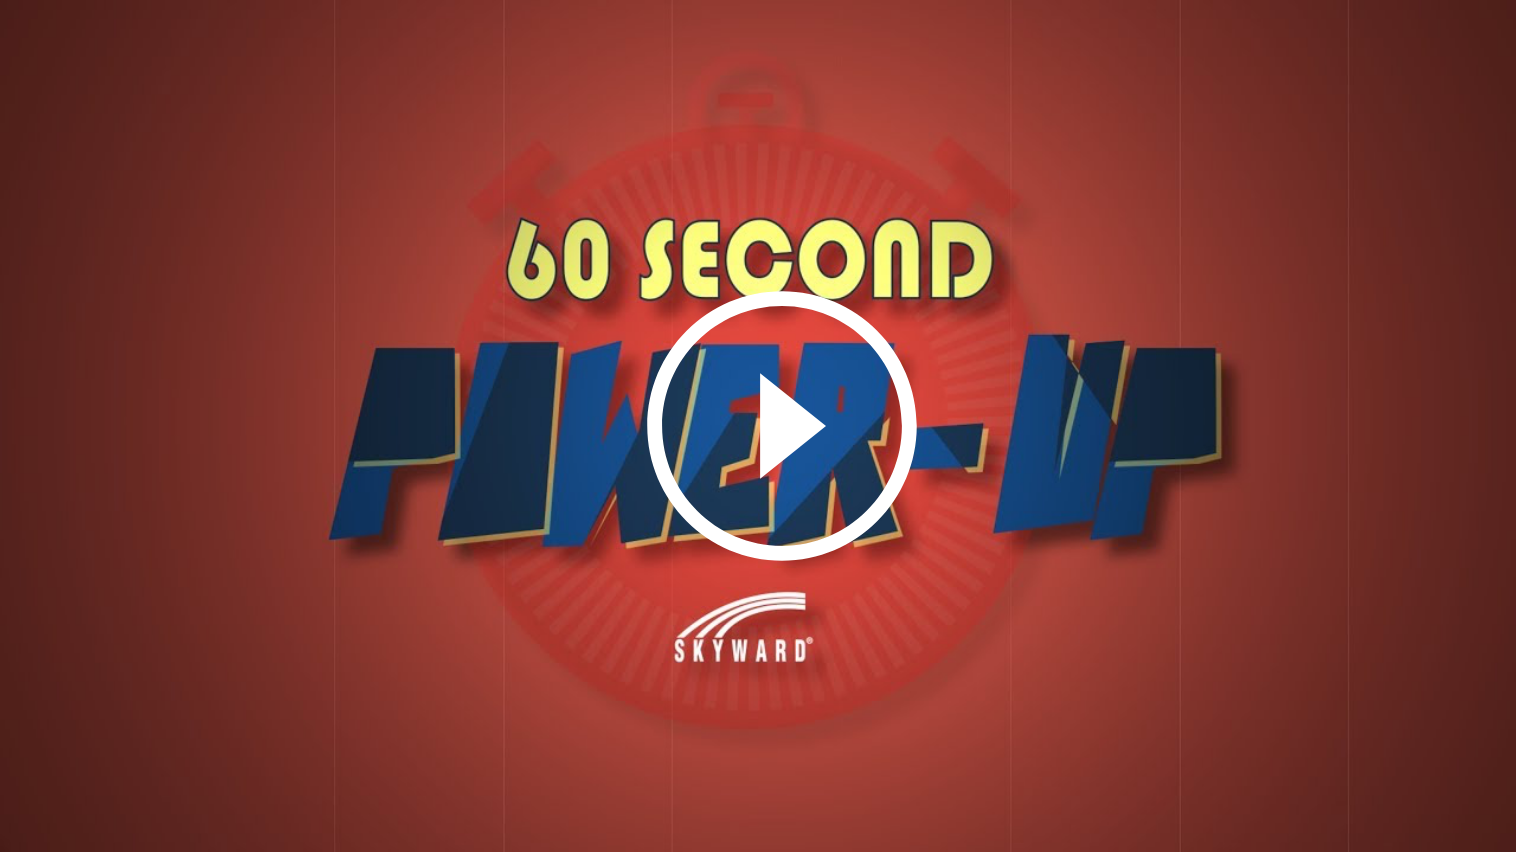 60 second Power-Up